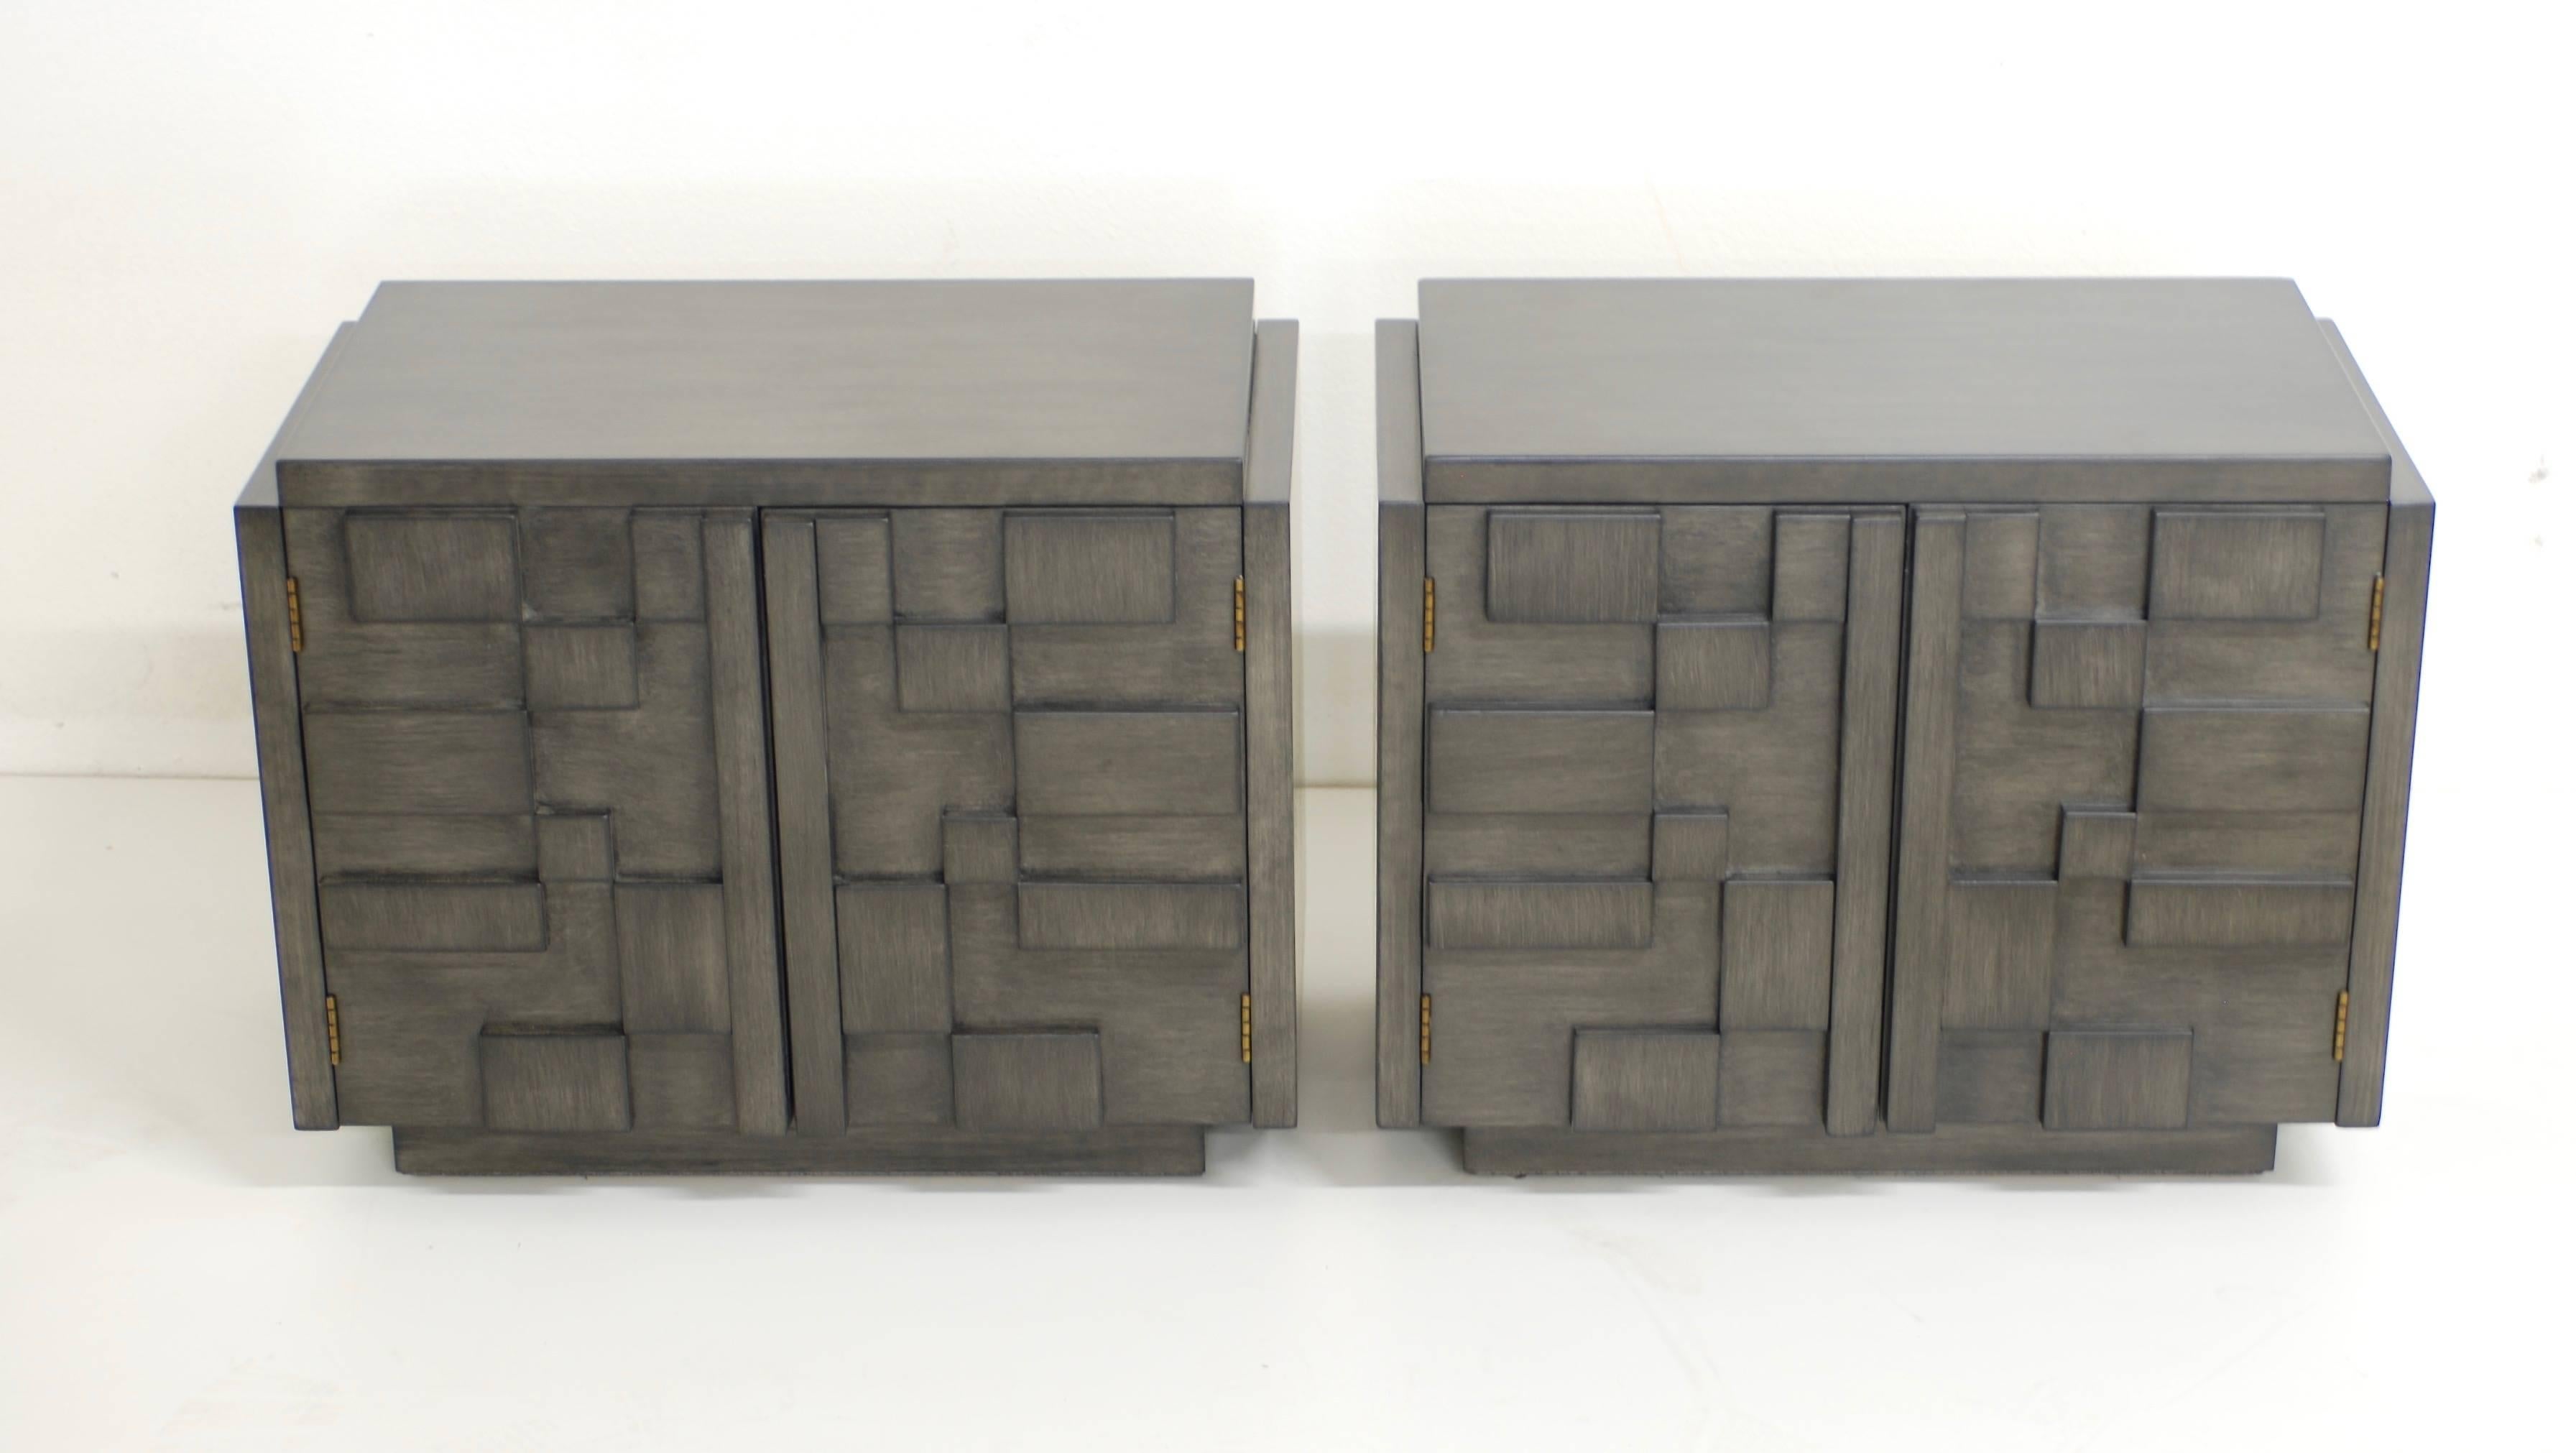 These nightstands manufactured by Lane from the Mosaic line have a handsome Brutalist geometric pattern on the door fronts. They have been refinished in a multi layered charcoal grey finish which has a ashy grey undertone and then a brushed charcoal